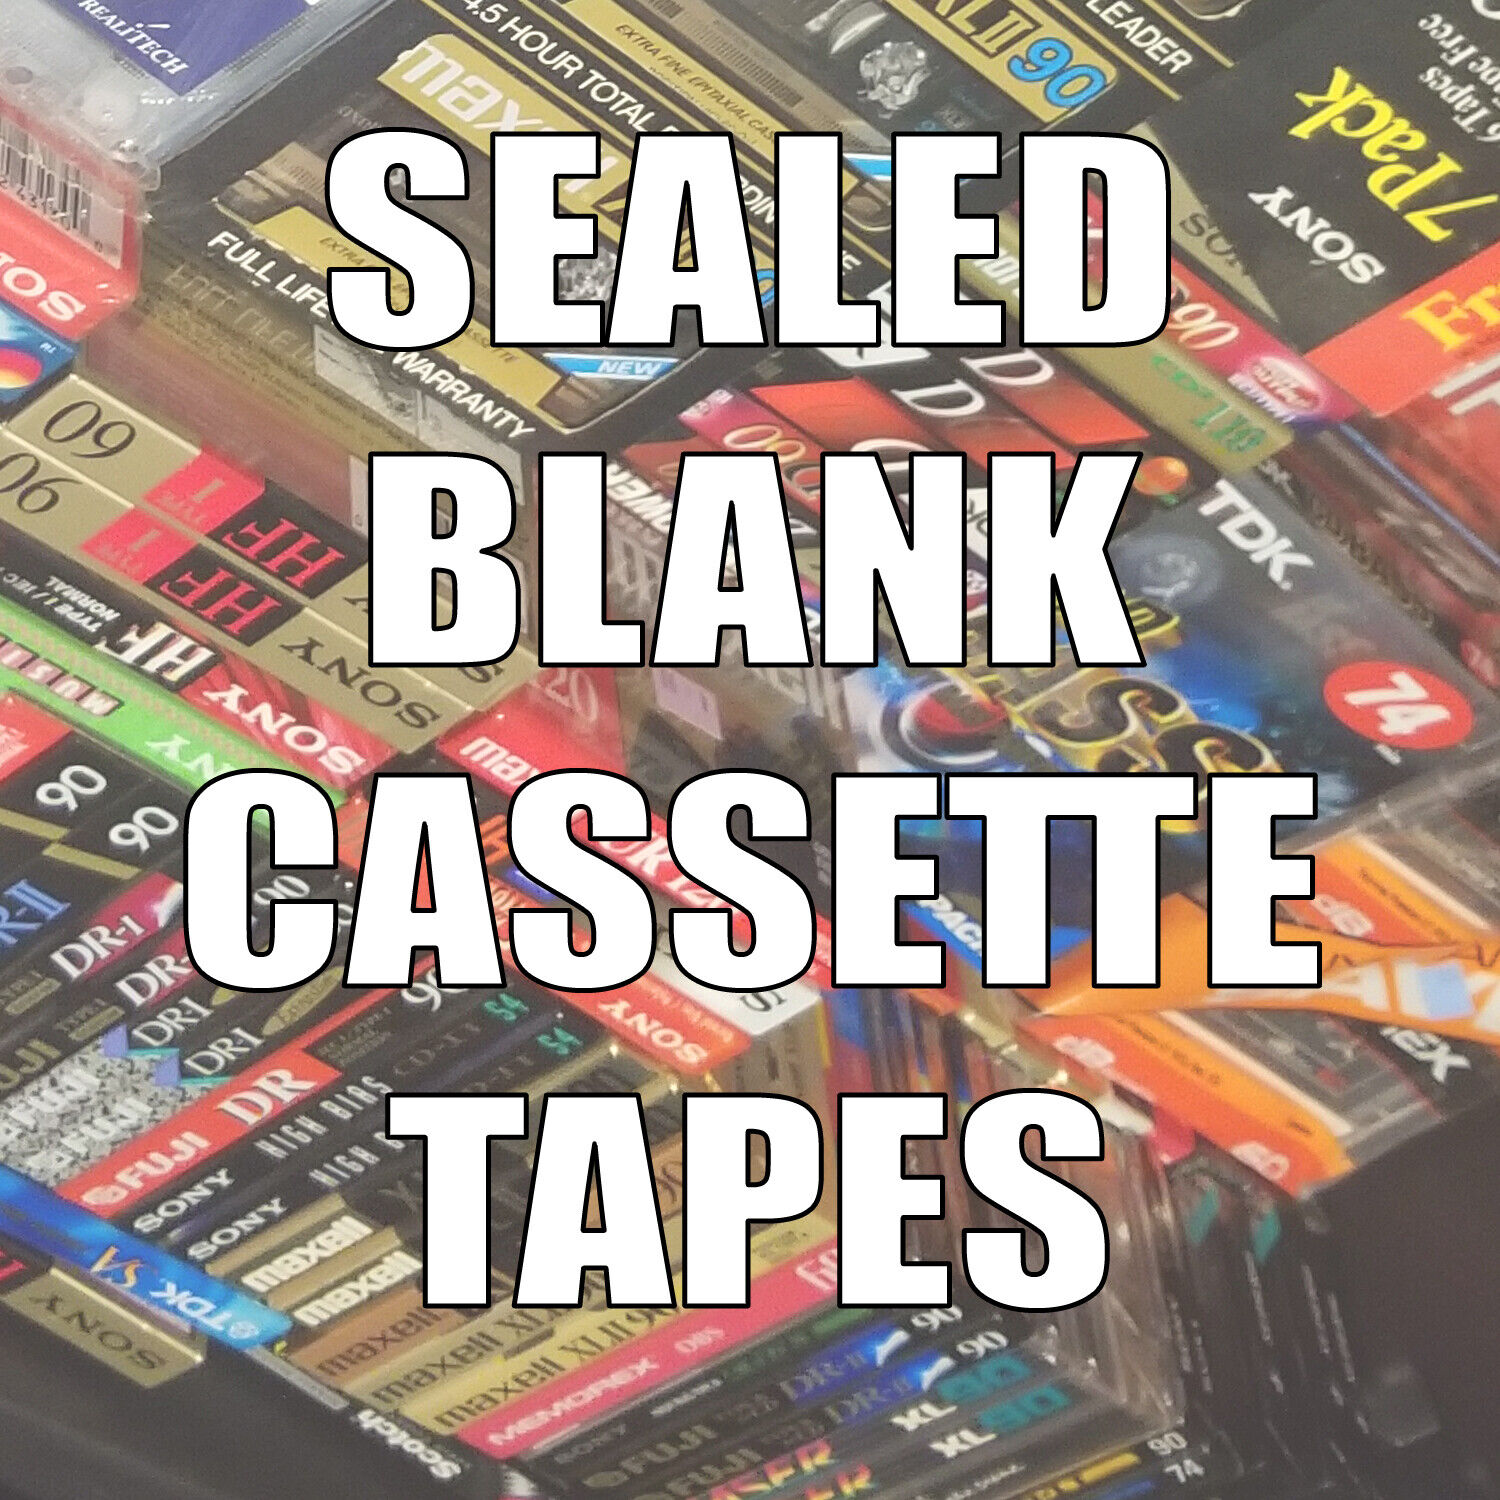 BLANK SEALED CASSETTE TAPES - Normal & High Bias - New Audio